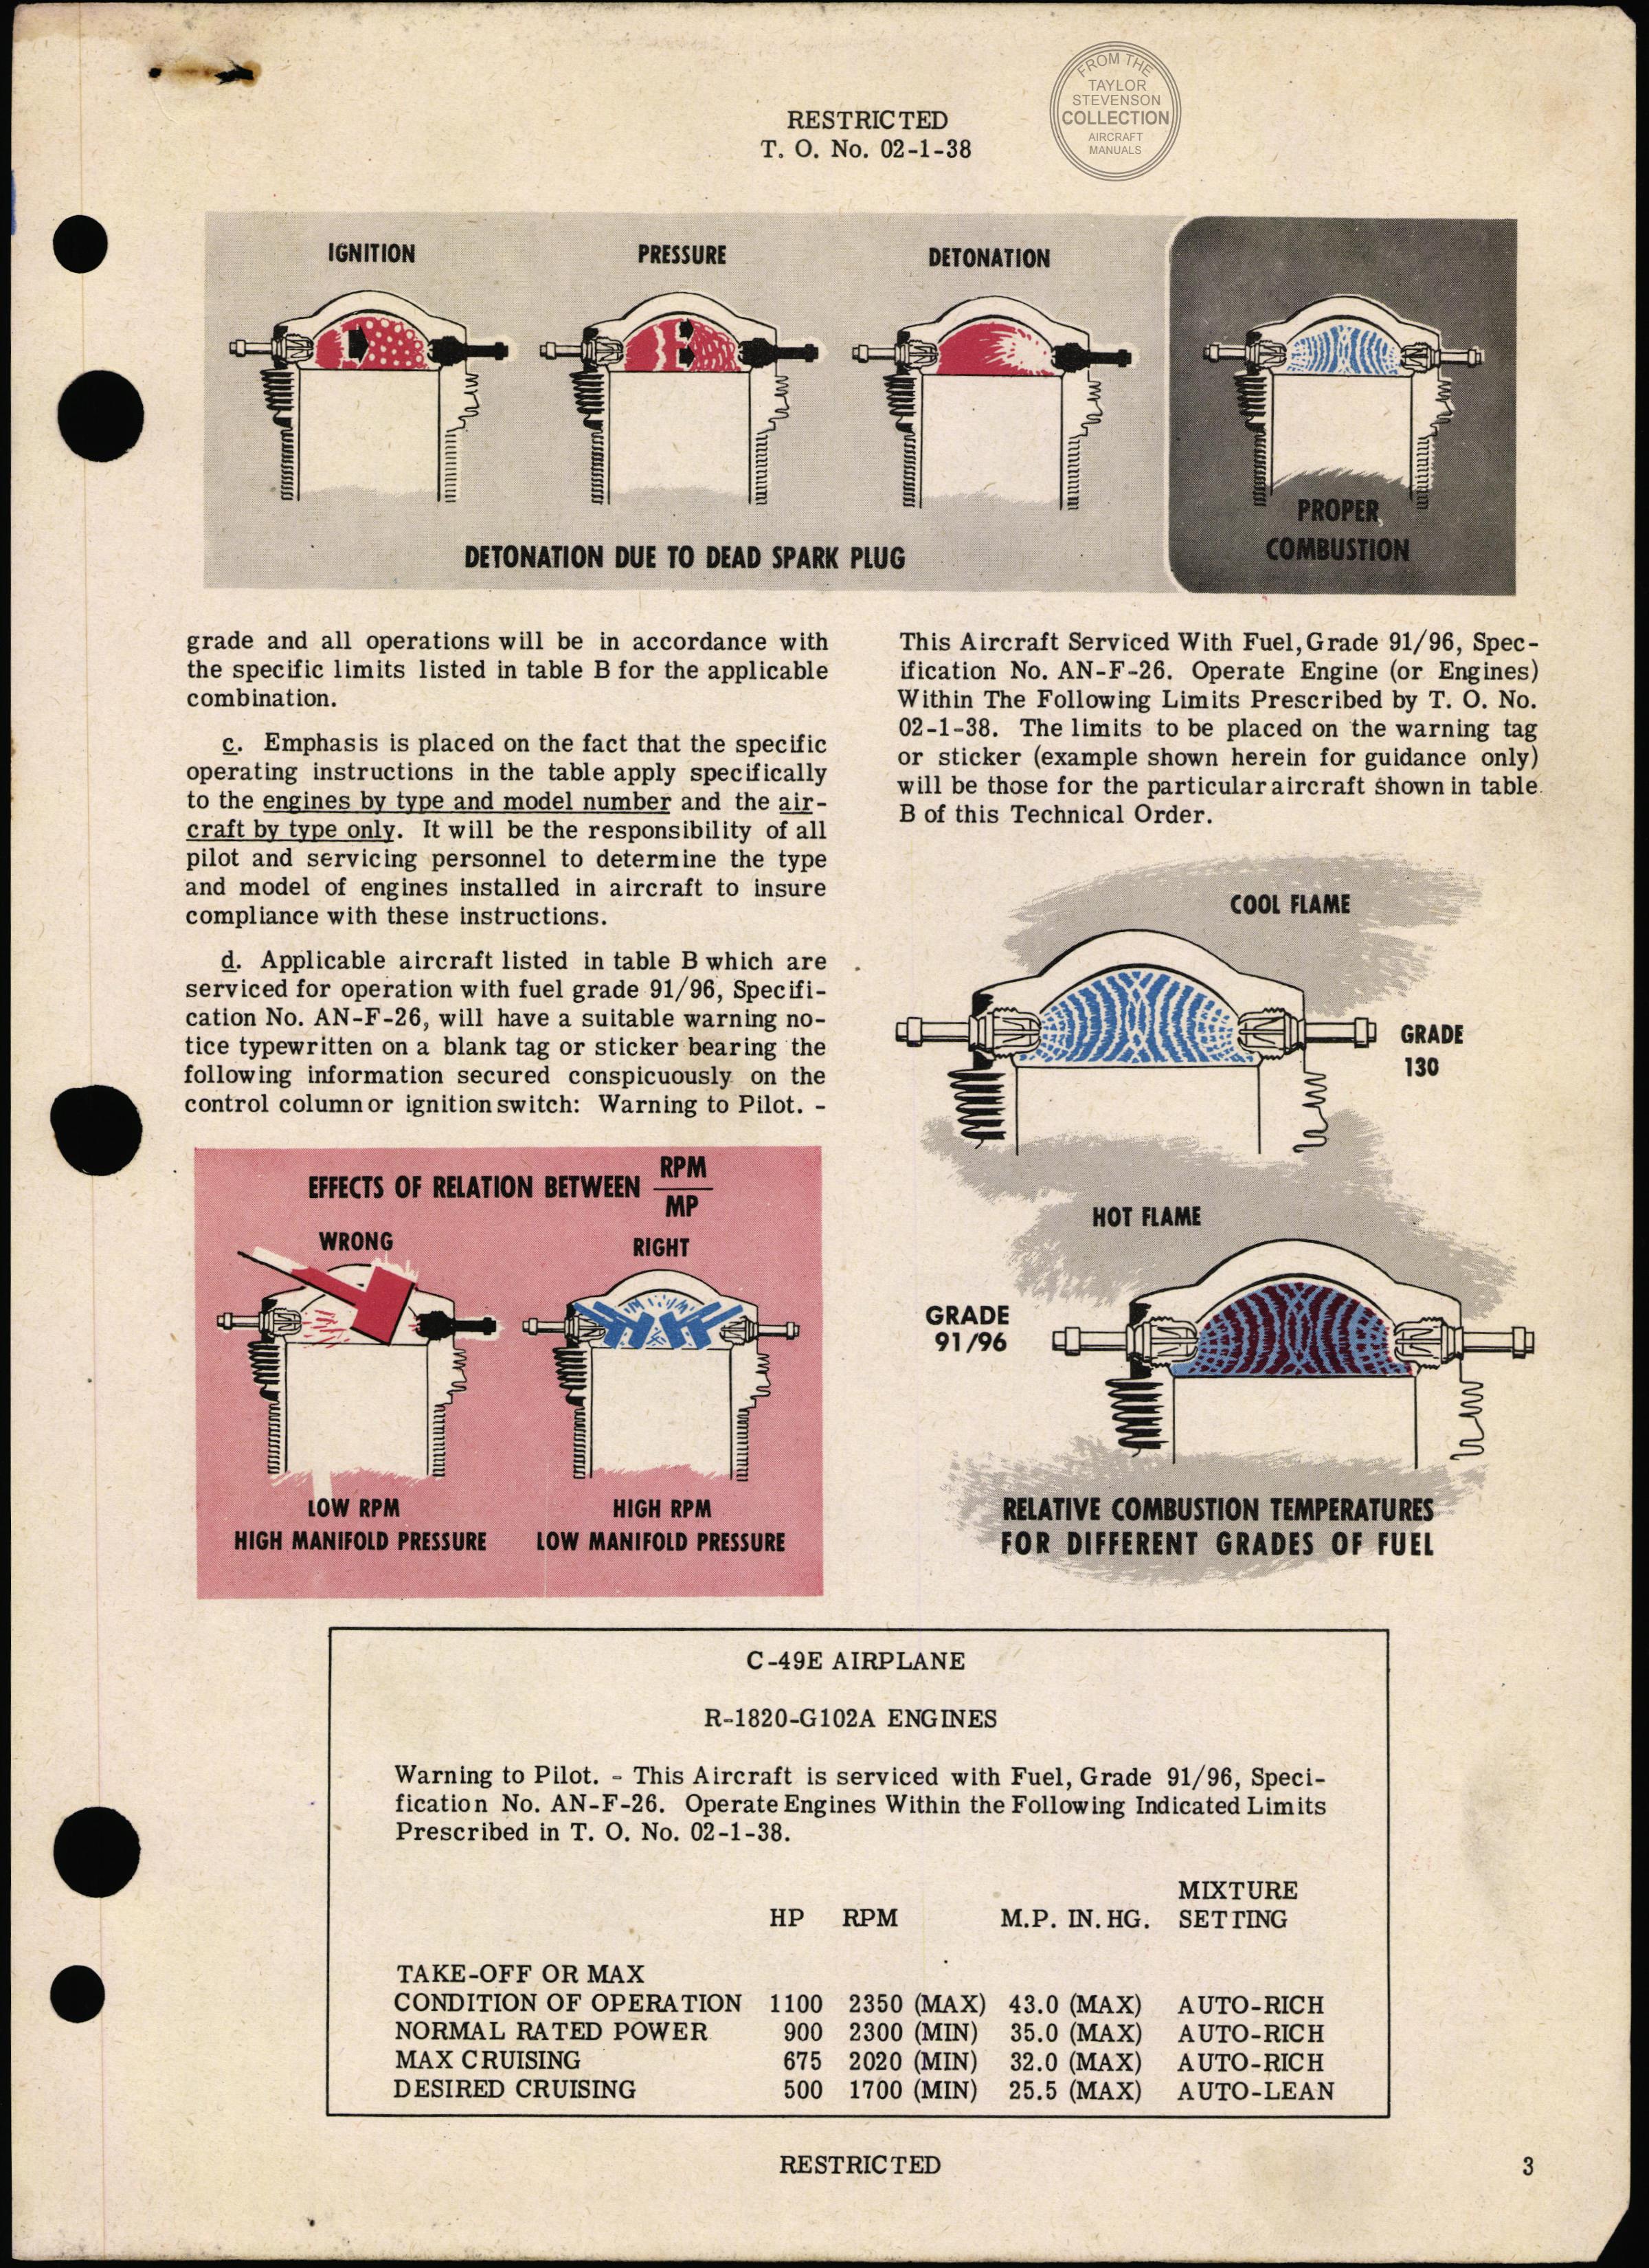 Sample page 5 from AirCorps Library document: Engines and Maintenance Parts - Specified and Alternate Grade Fuel For Aircraft-Engine Combinations